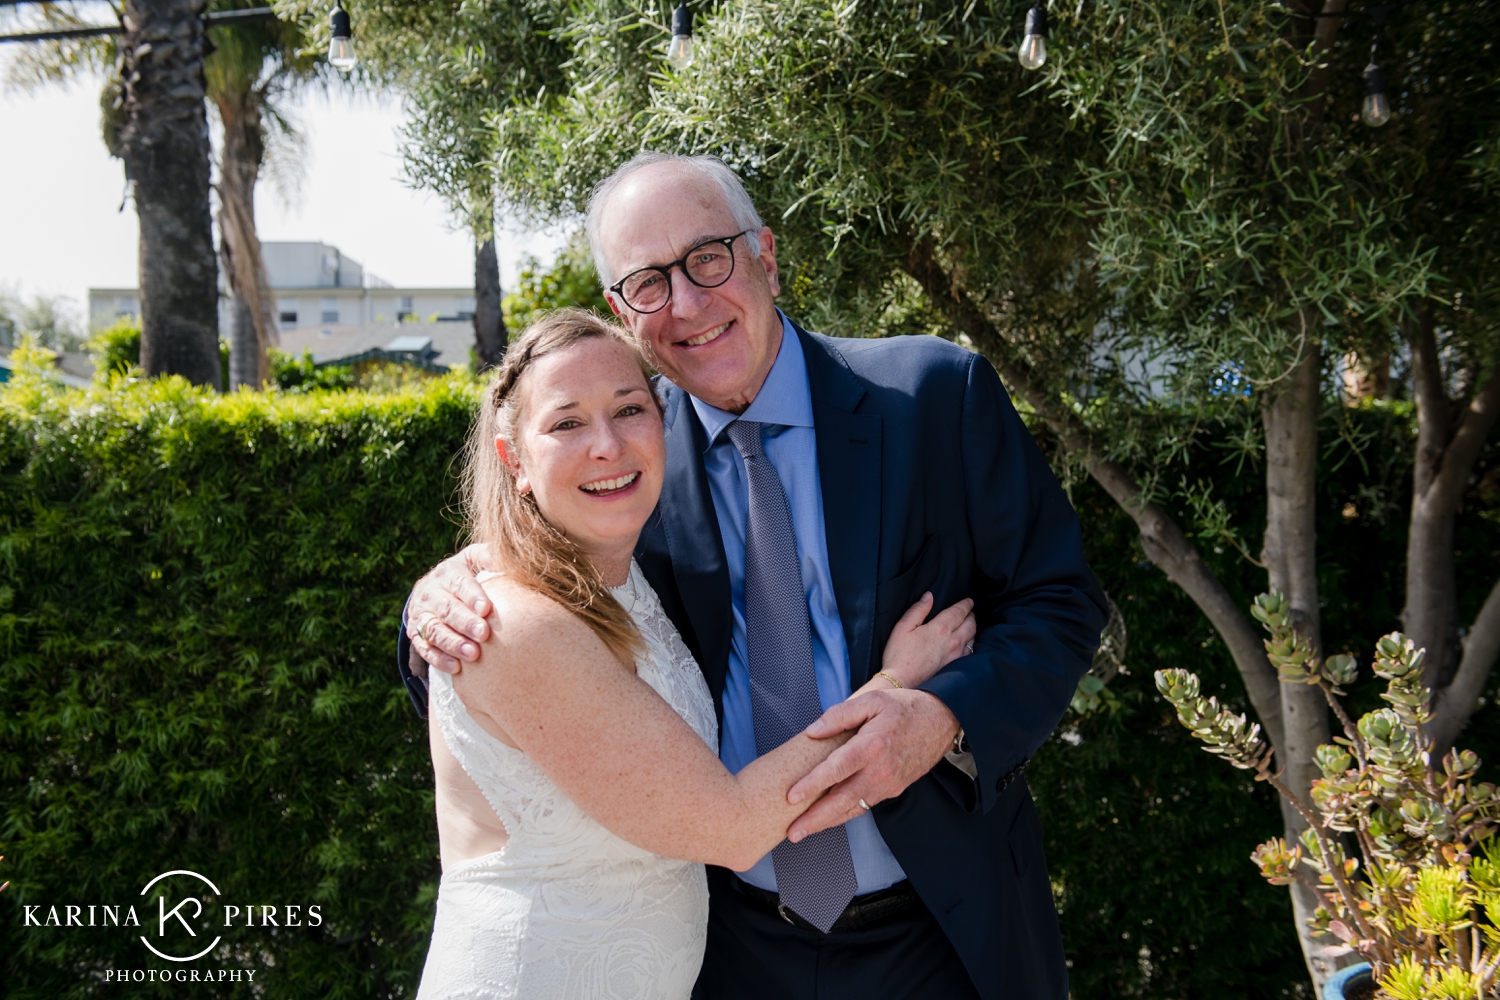 Father and daughter first look - Santa Monica wedding photographer